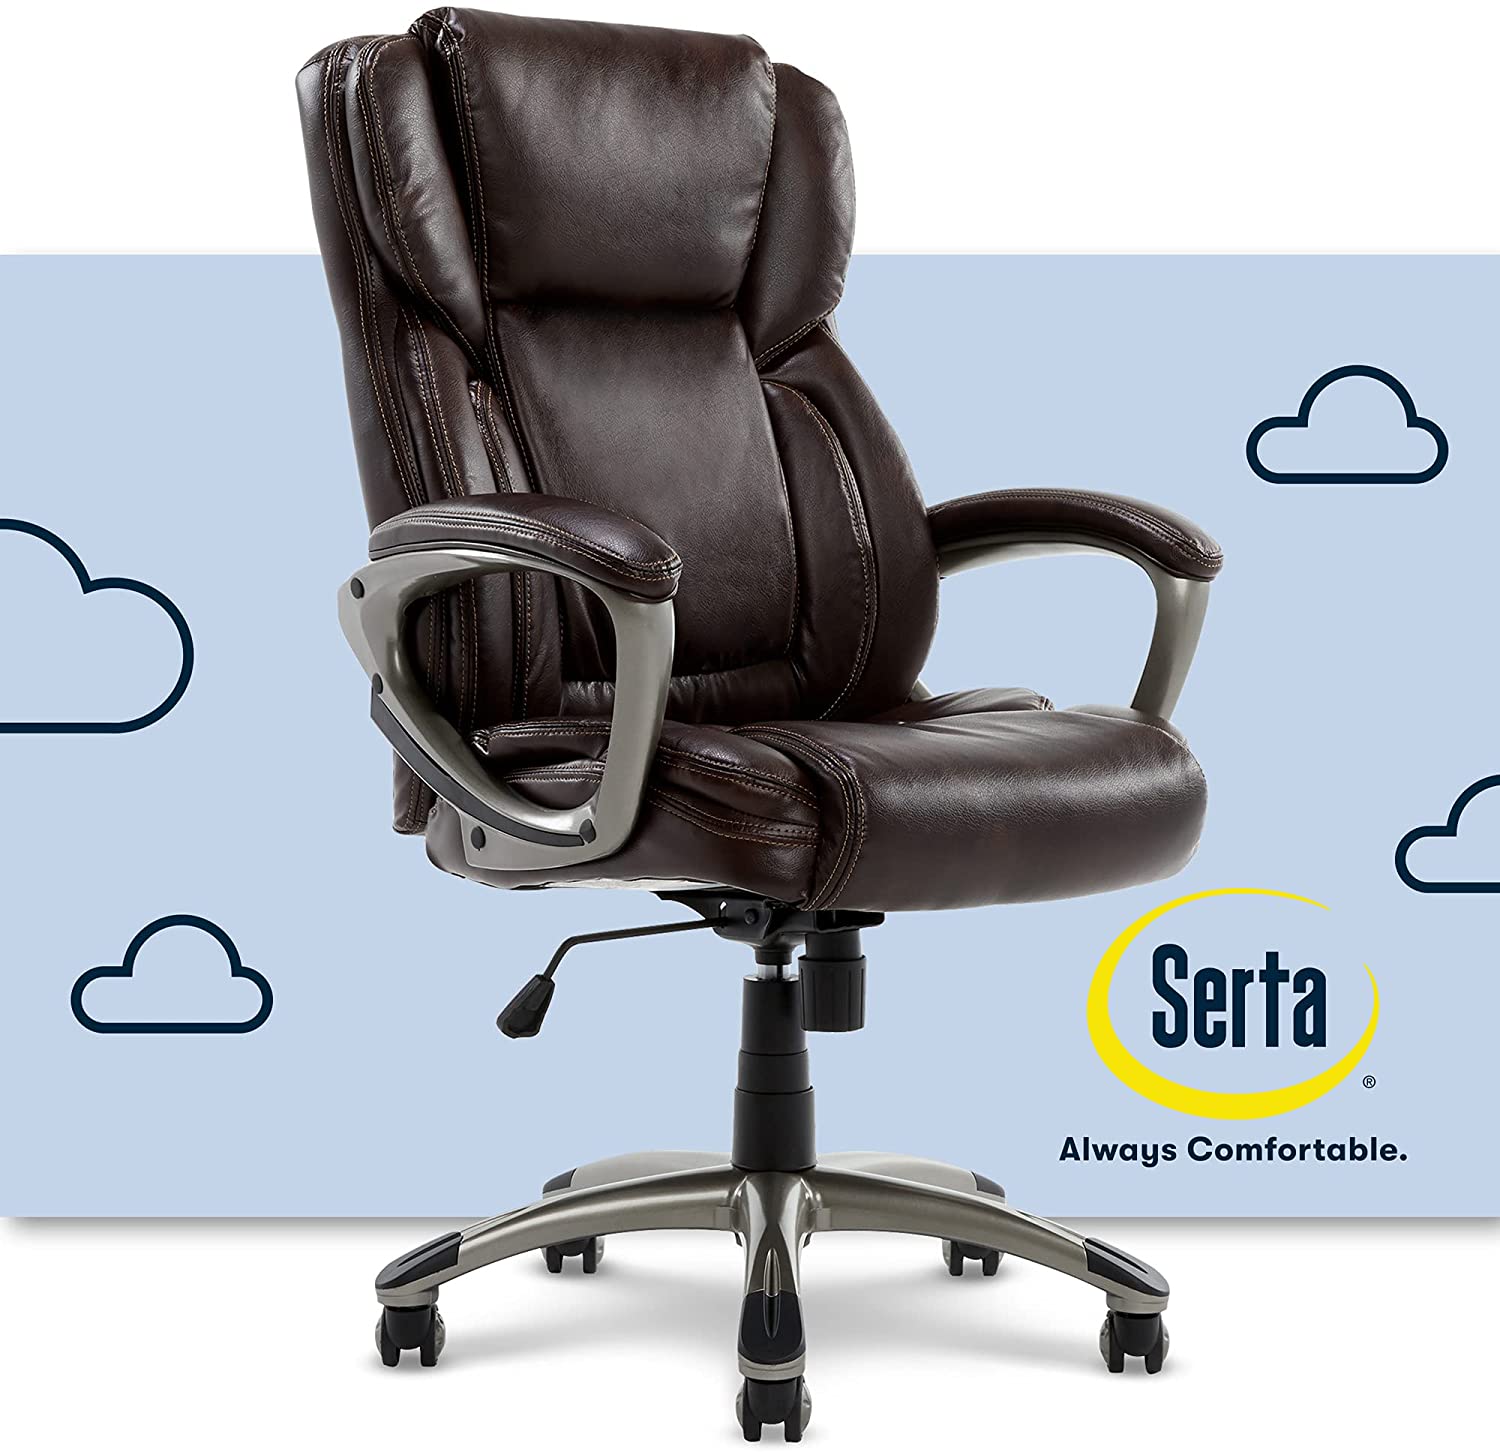 Cheap Leather Office Chairs: Top pick for 2022